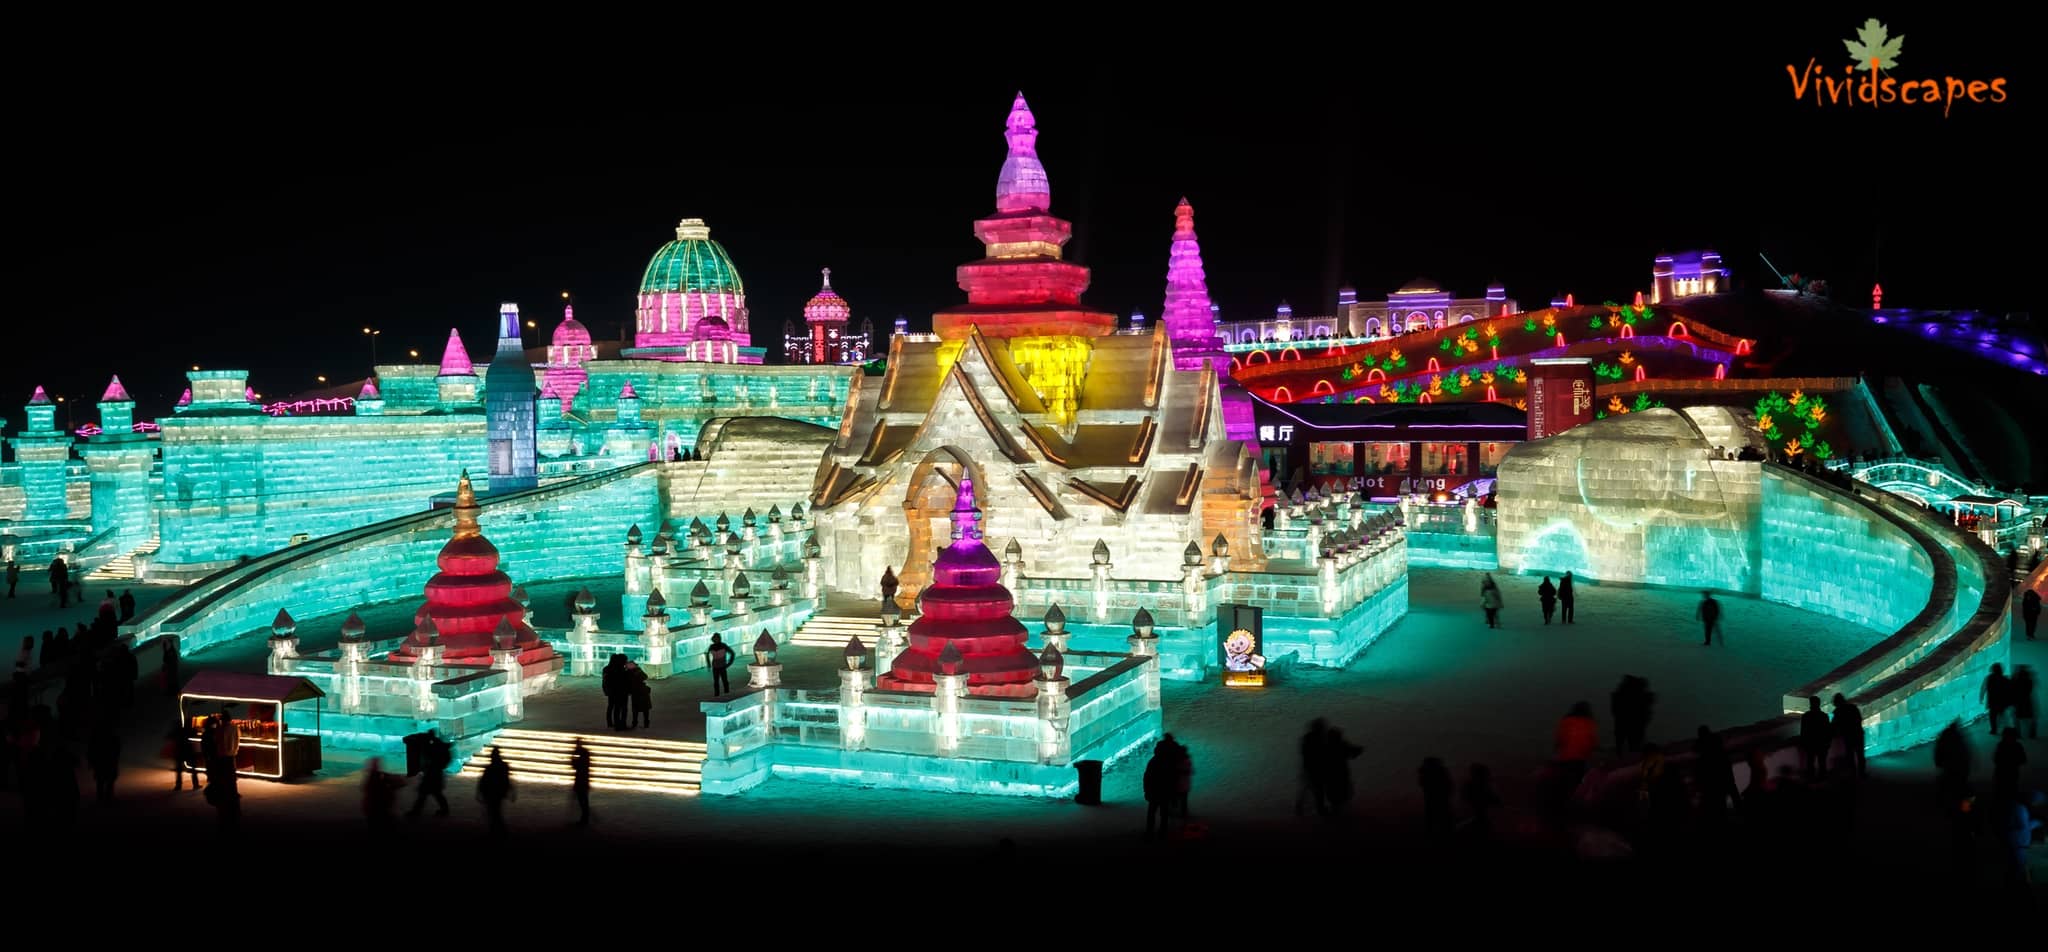 Ice and Snow Sculpture festival in Harbin